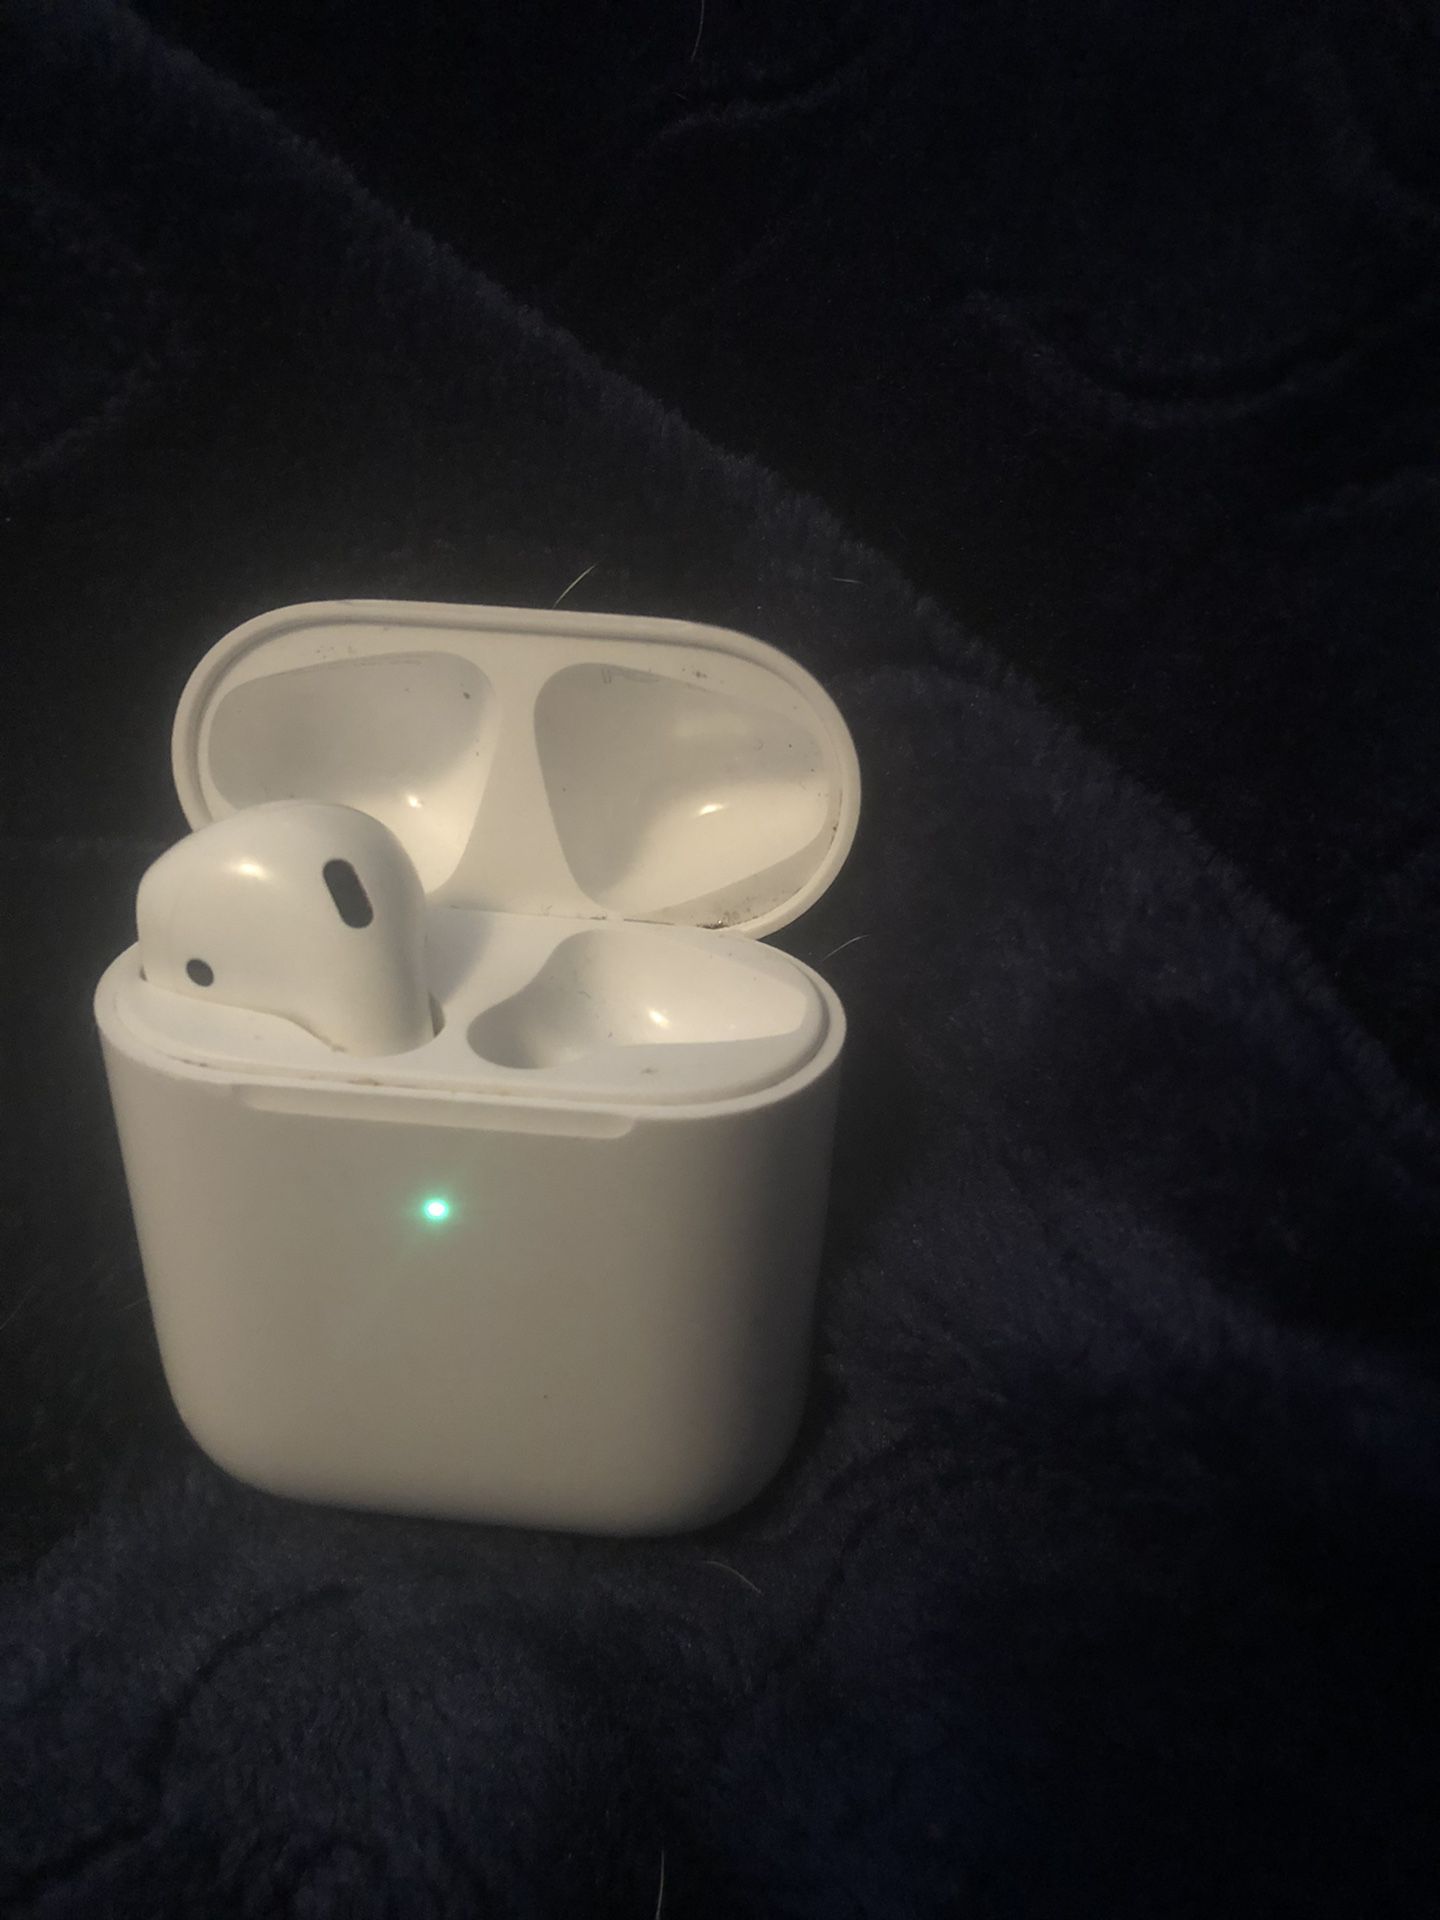 Left AirPod with charging case